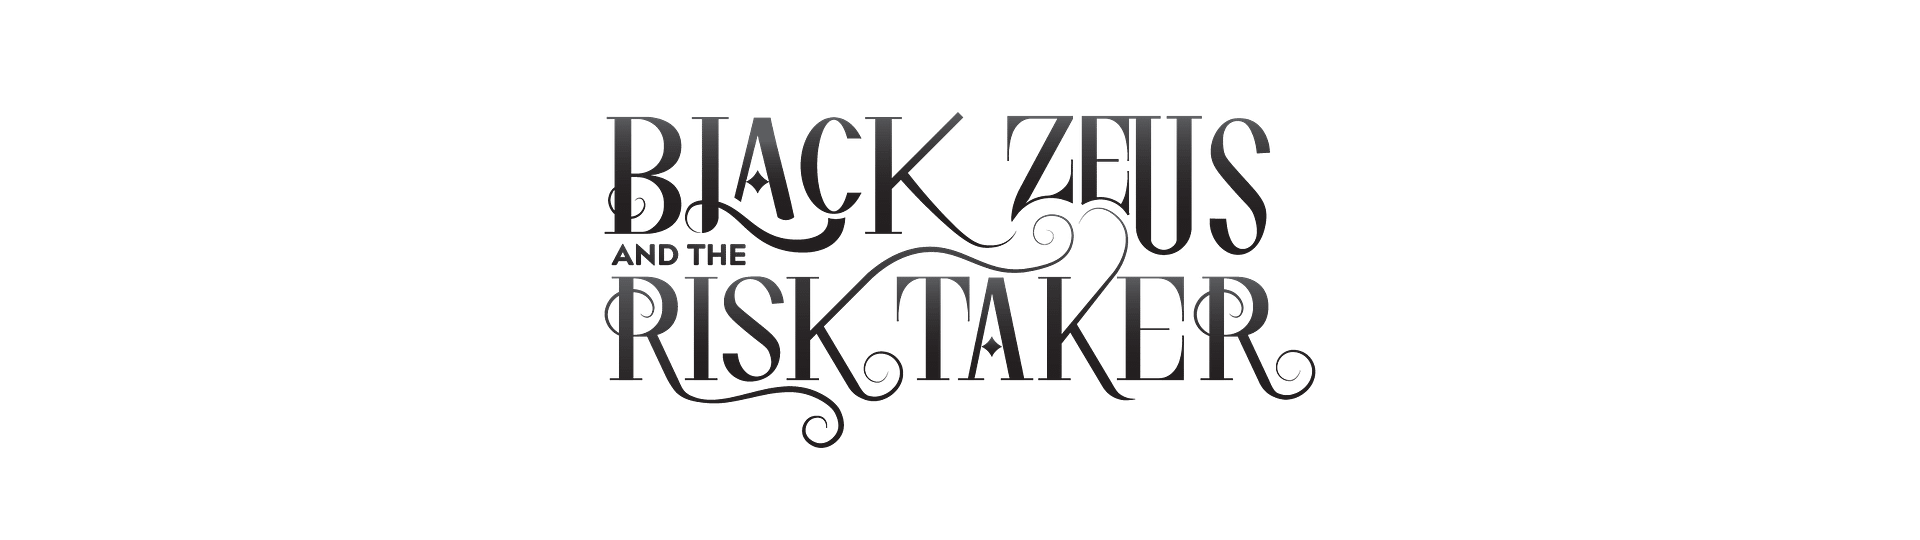 Black Zeus and the Risk Taker logo